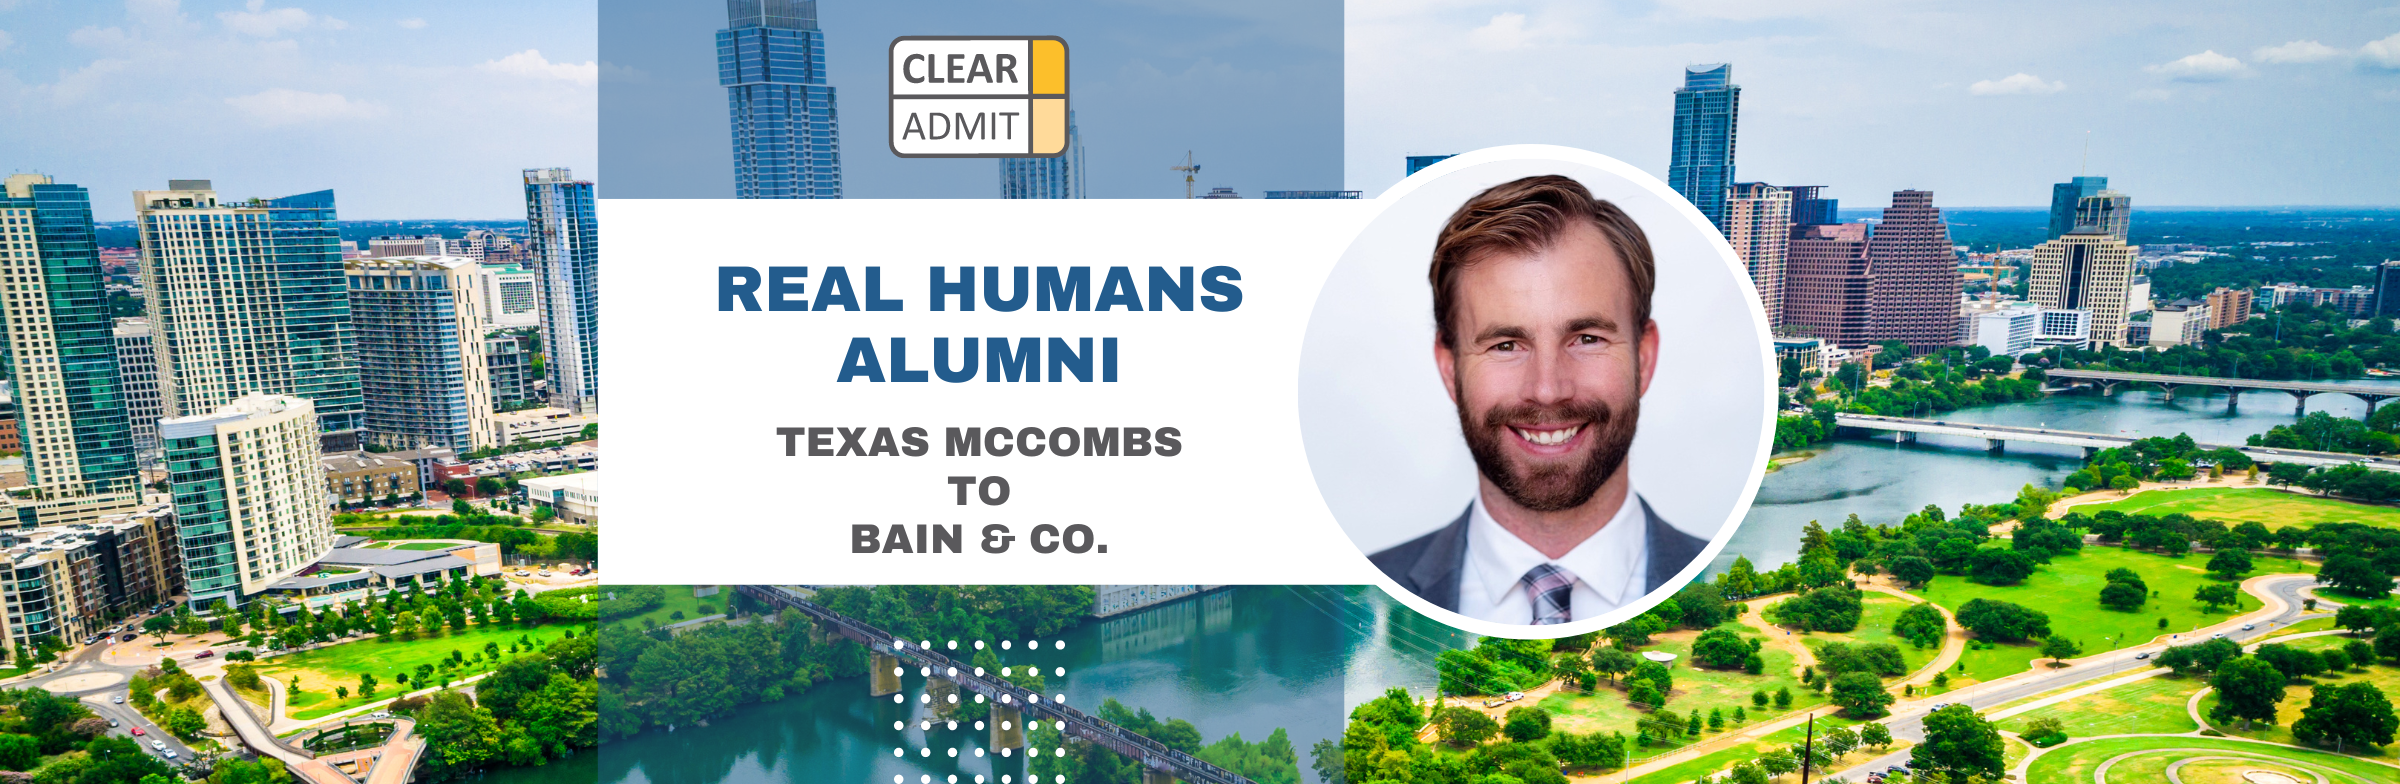 Image for Real Humans of Bain & Co.: Drew Ness, Texas McCombs MBA ’22, Consultant